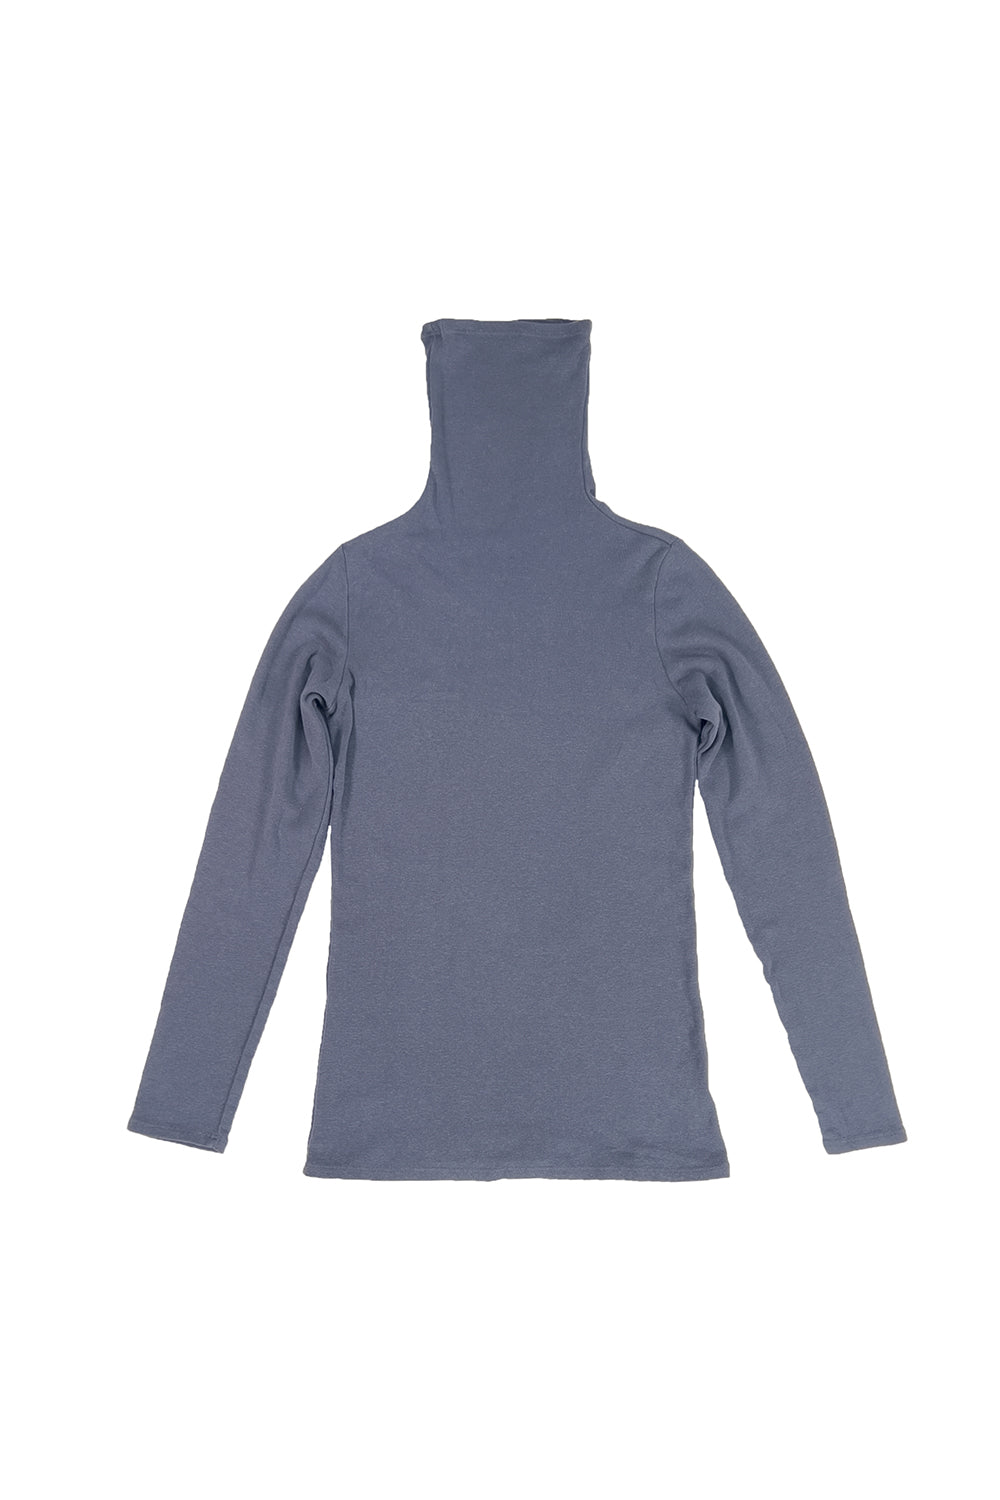 Whidbey Turtleneck | Jungmaven Hemp Clothing & Accessories - USA Made Navy / S